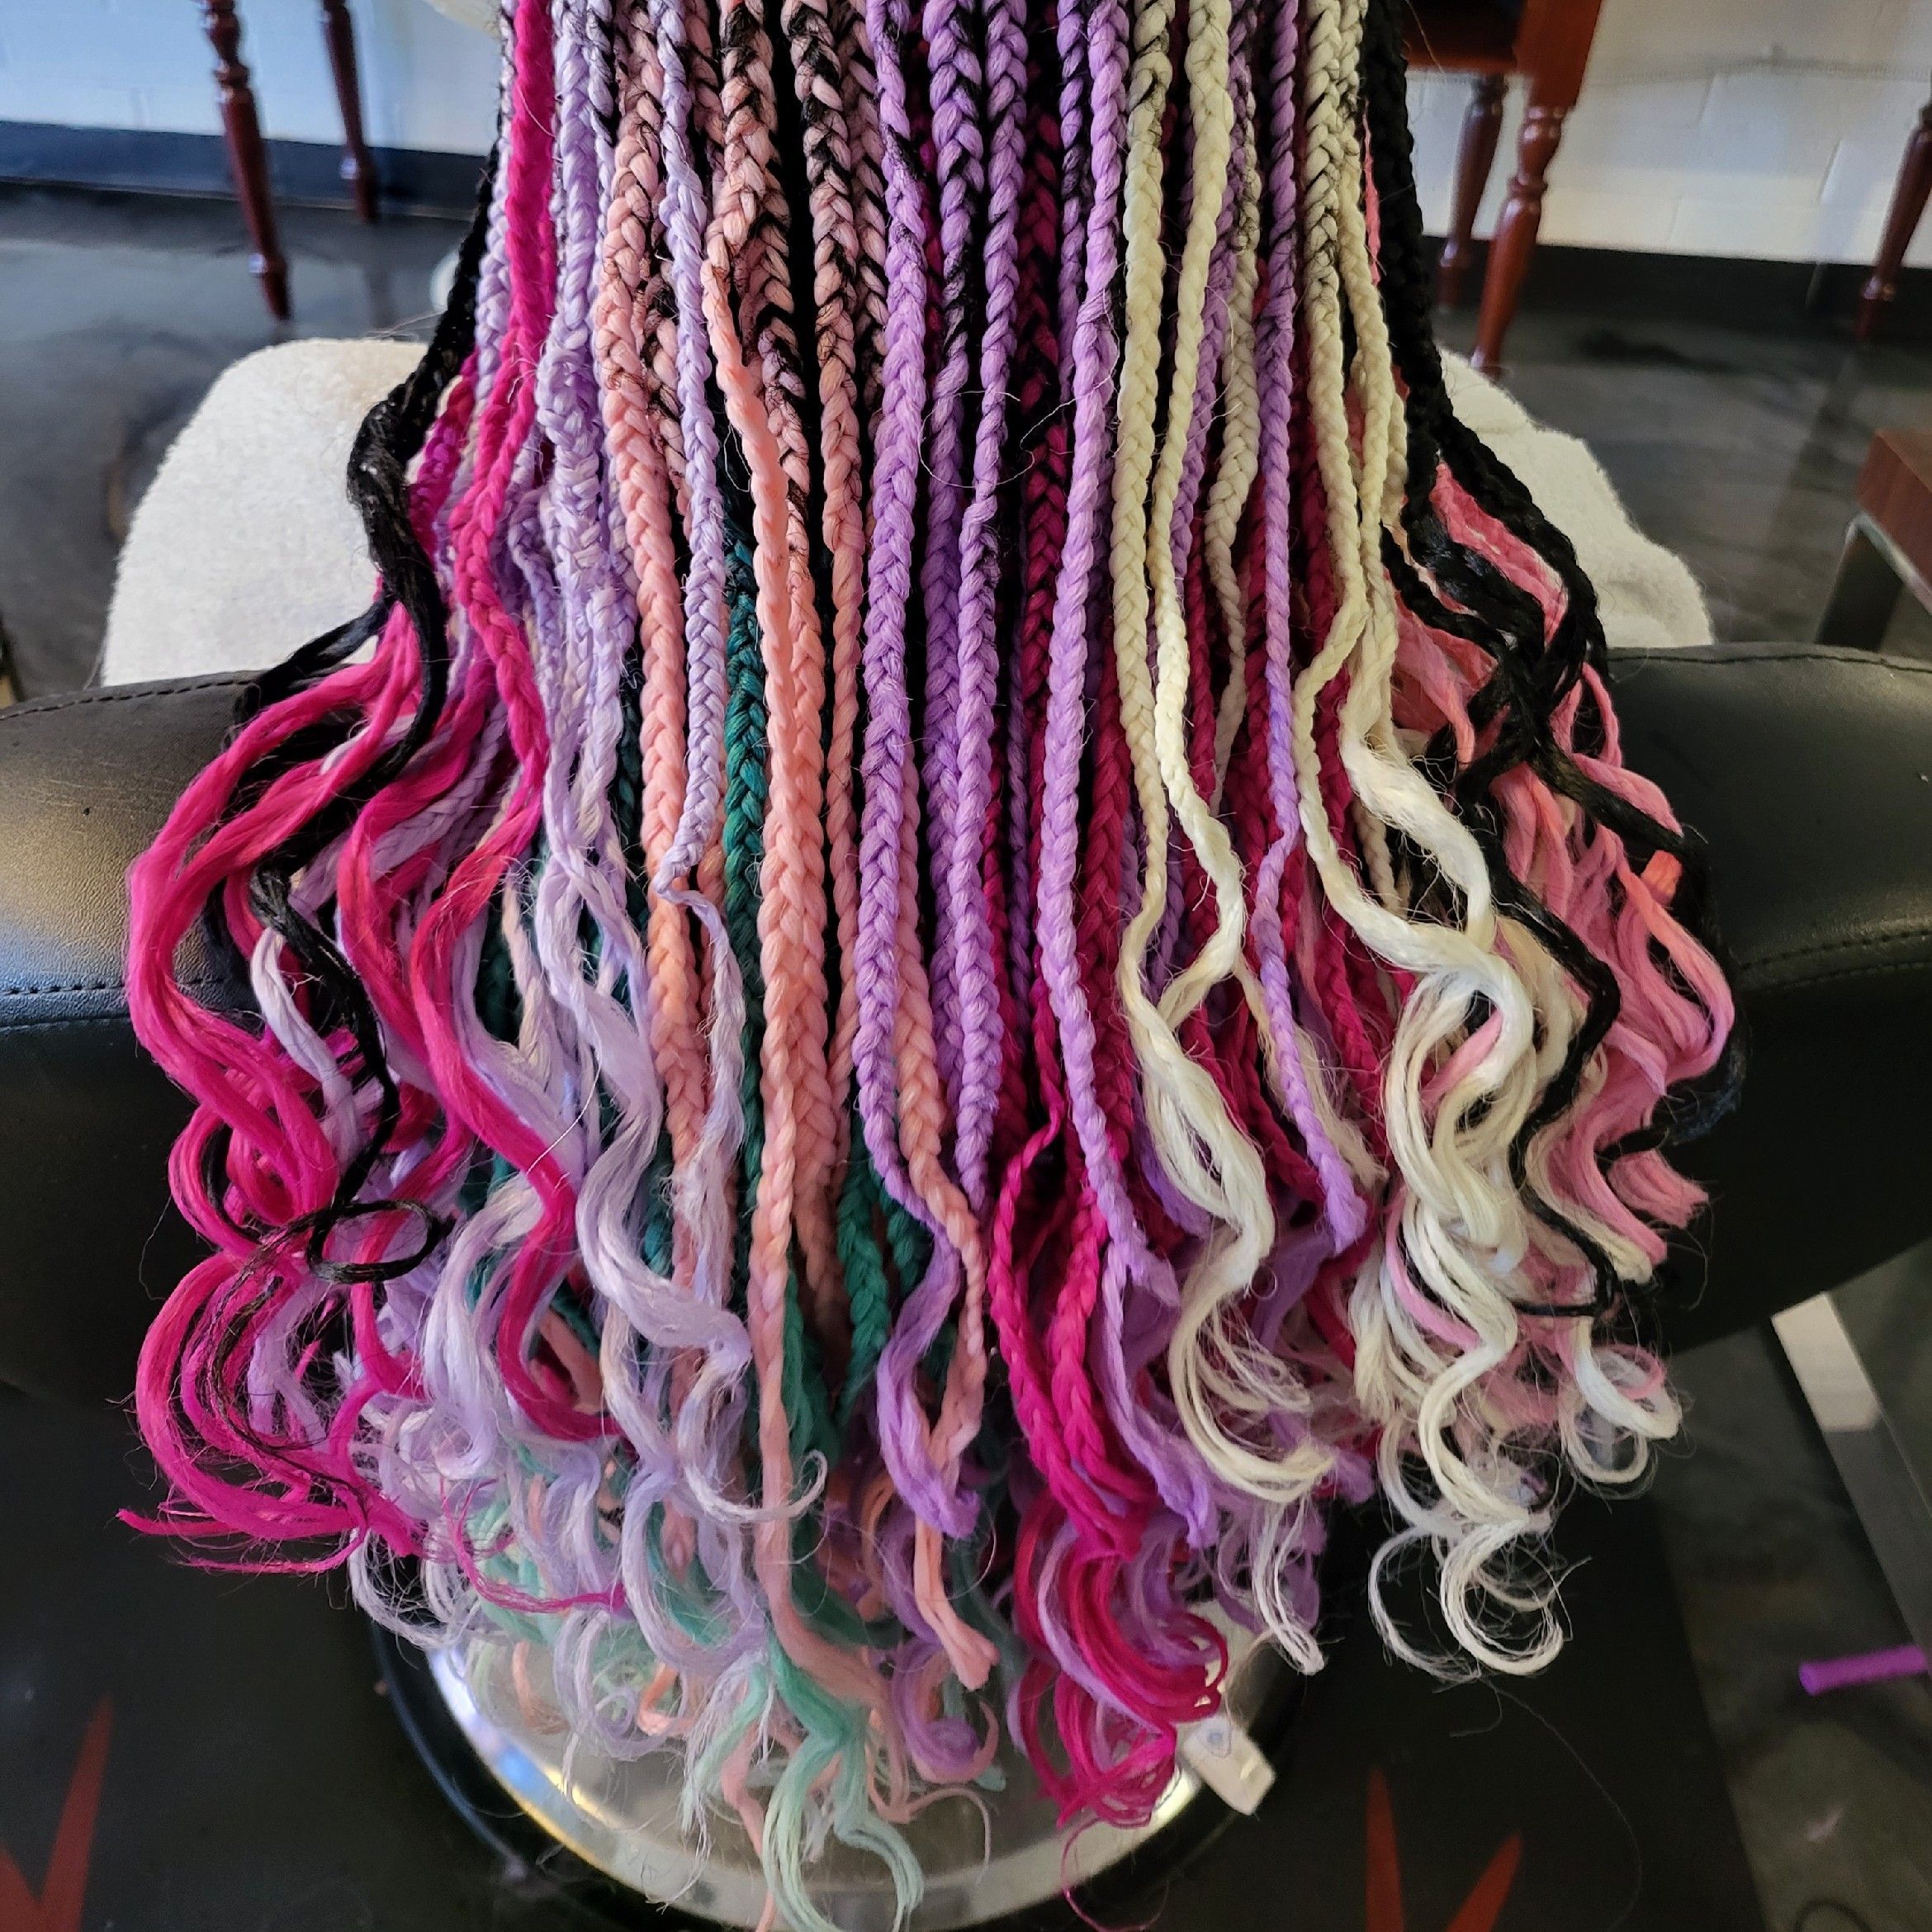 Braid_sbysteph, 5556 E Speedway Blvd, 11348 E GLOWING SUNSET DR, Tucson, 85712